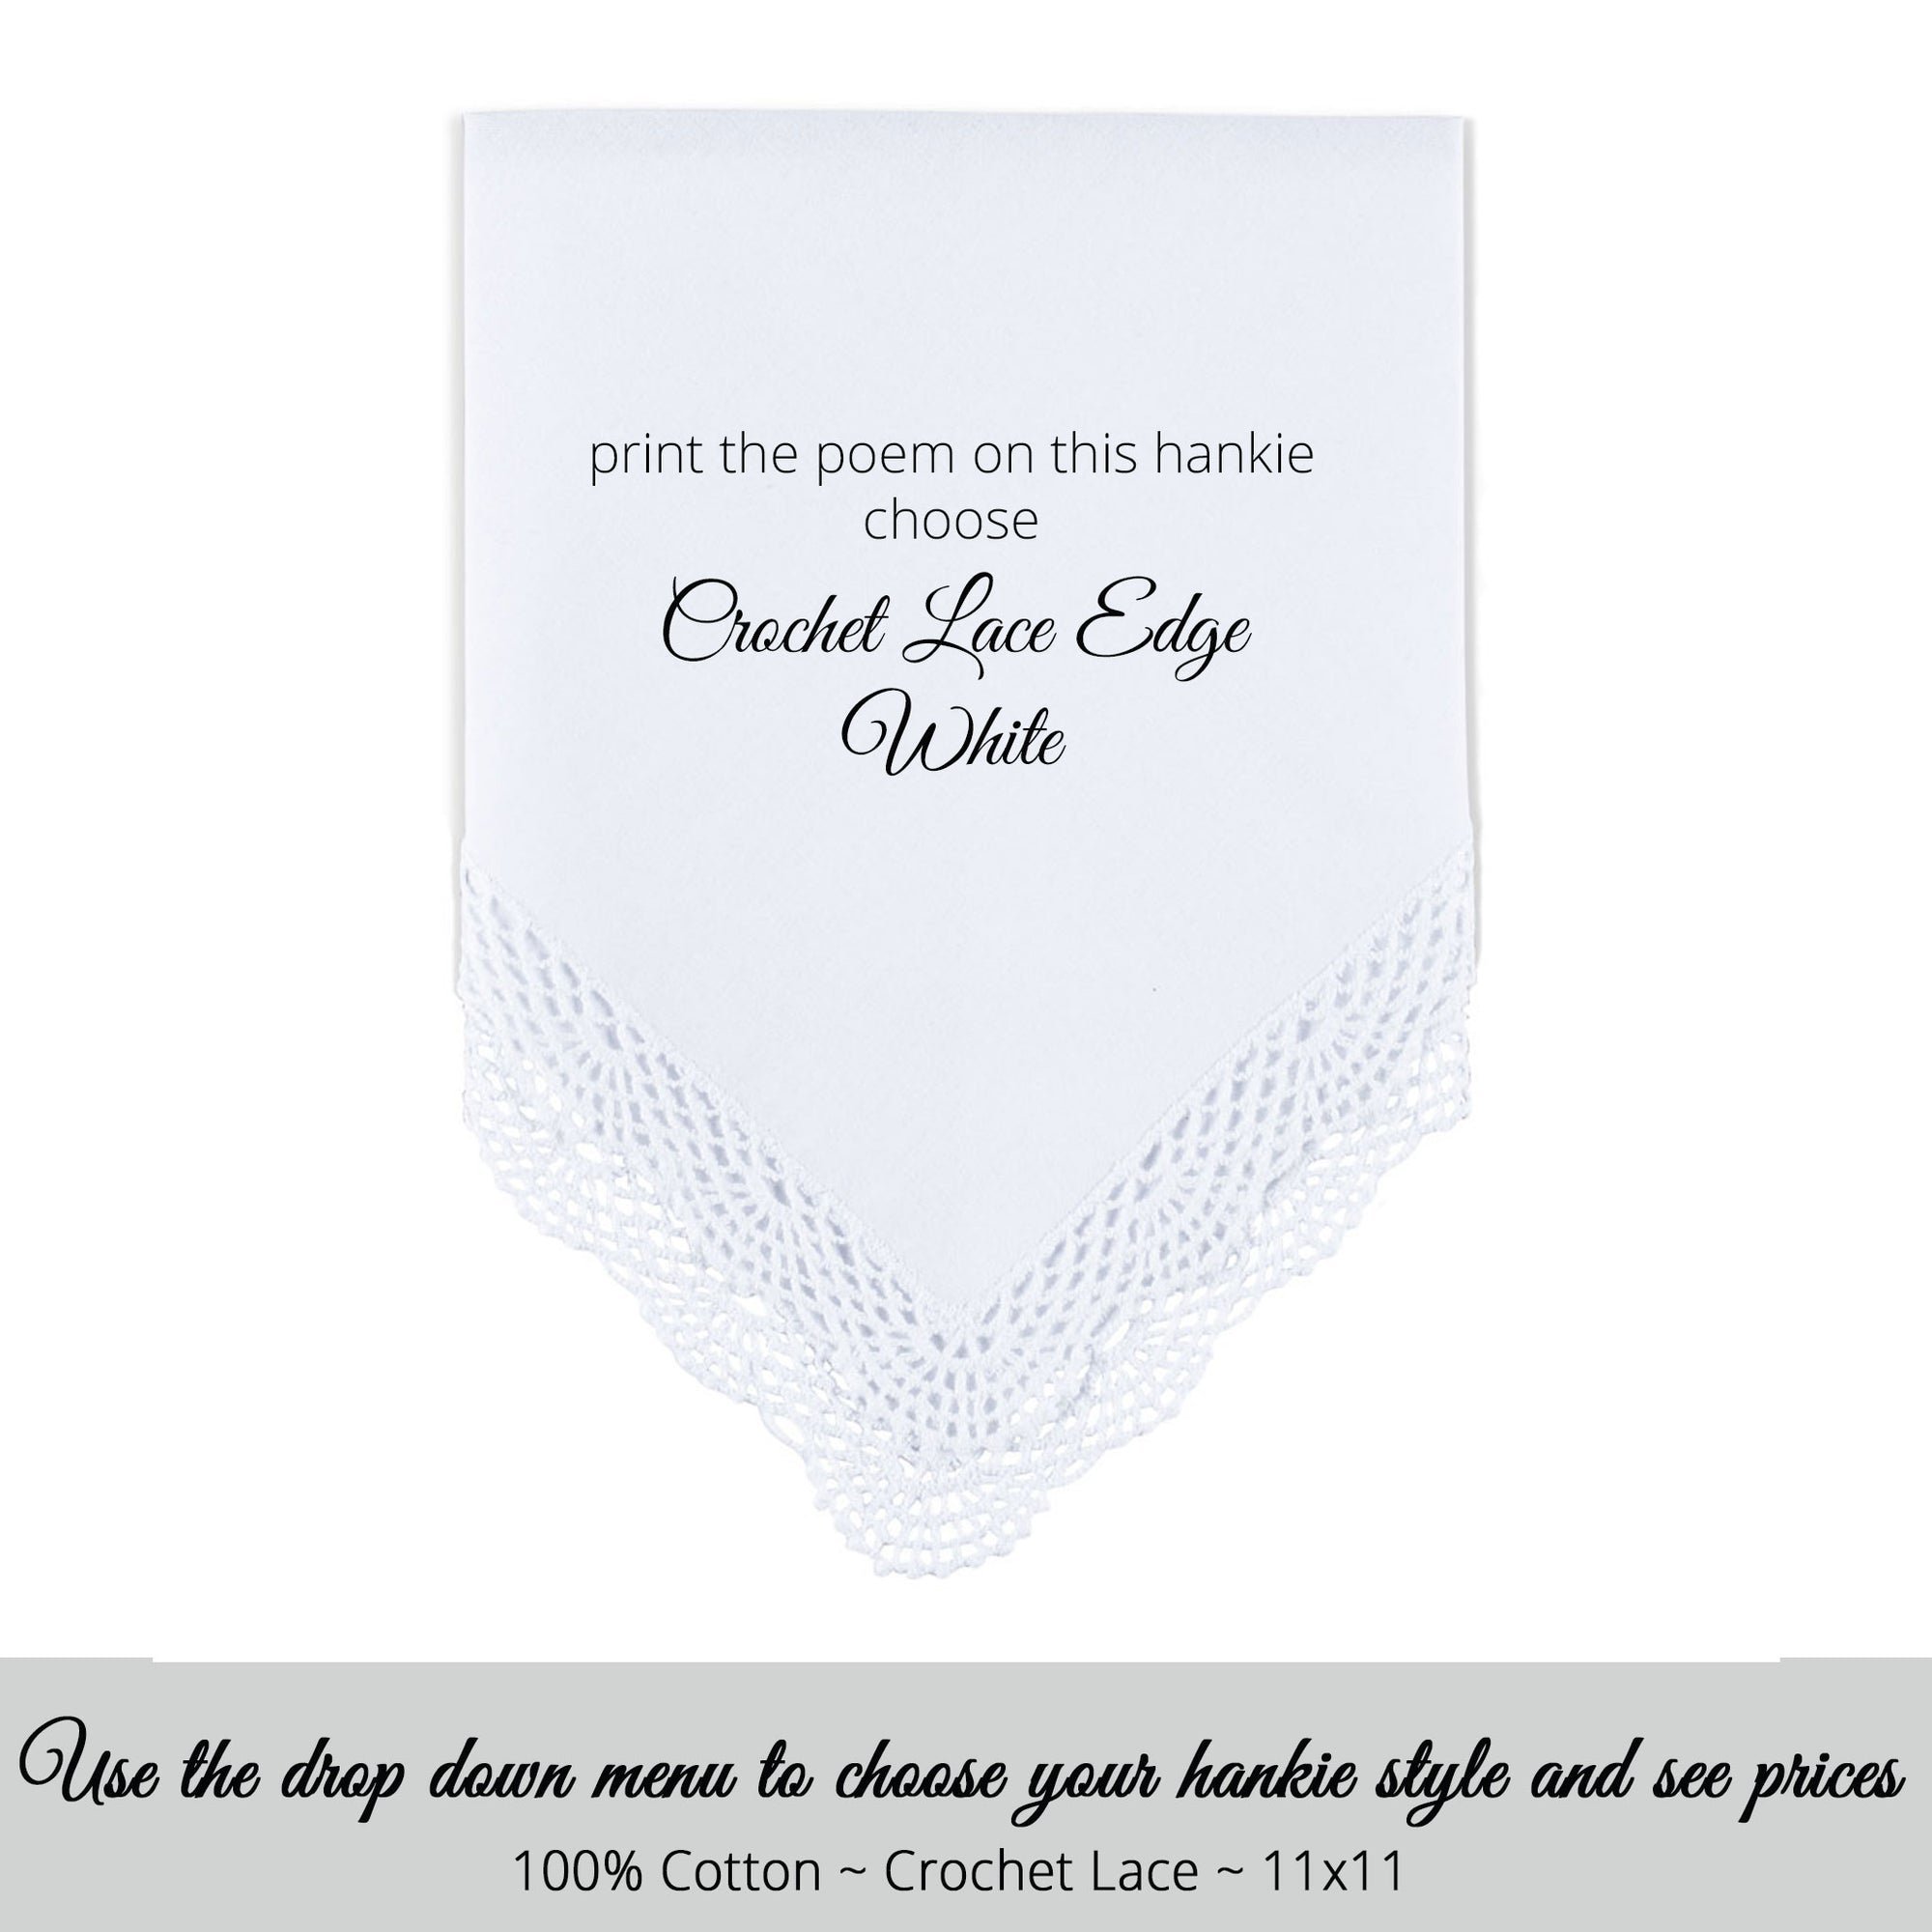 Wedding handkerchief white with crochet lace edge poem printed hankie for the sister in law of the bride